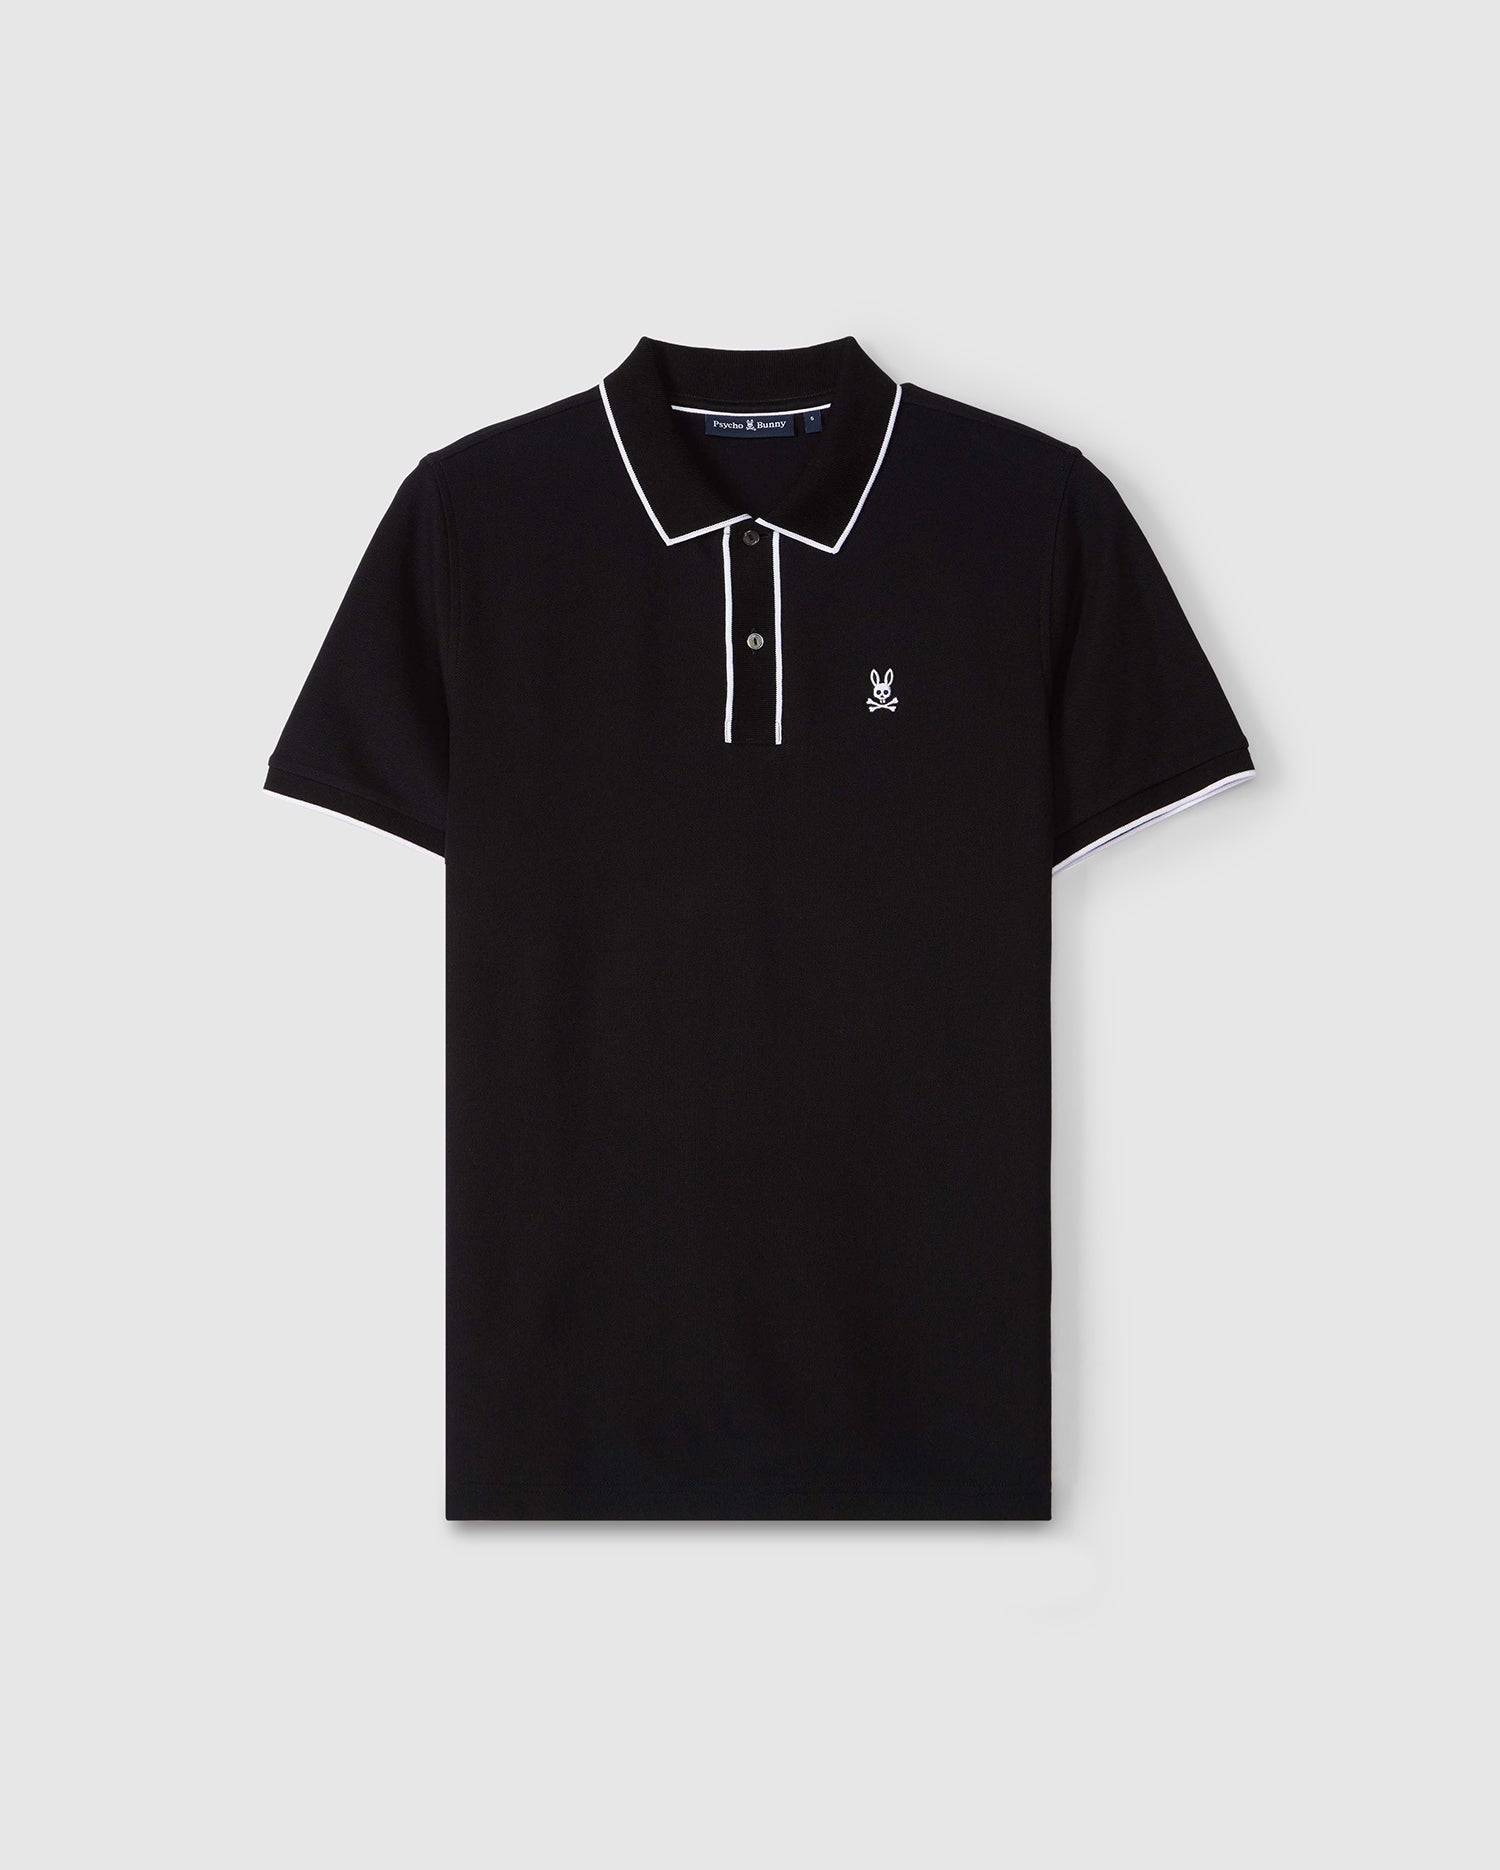 A black Psycho Bunny MENS DALLAS PIQUE POLO SHIRT - B6K602C200 with white trim on the collar and sleeve edges. It features an embroidered Bunny logo on the left chest and has a buttoned placket with genuine mother of pearl buttons. The shirt is displayed against a plain light gray background.